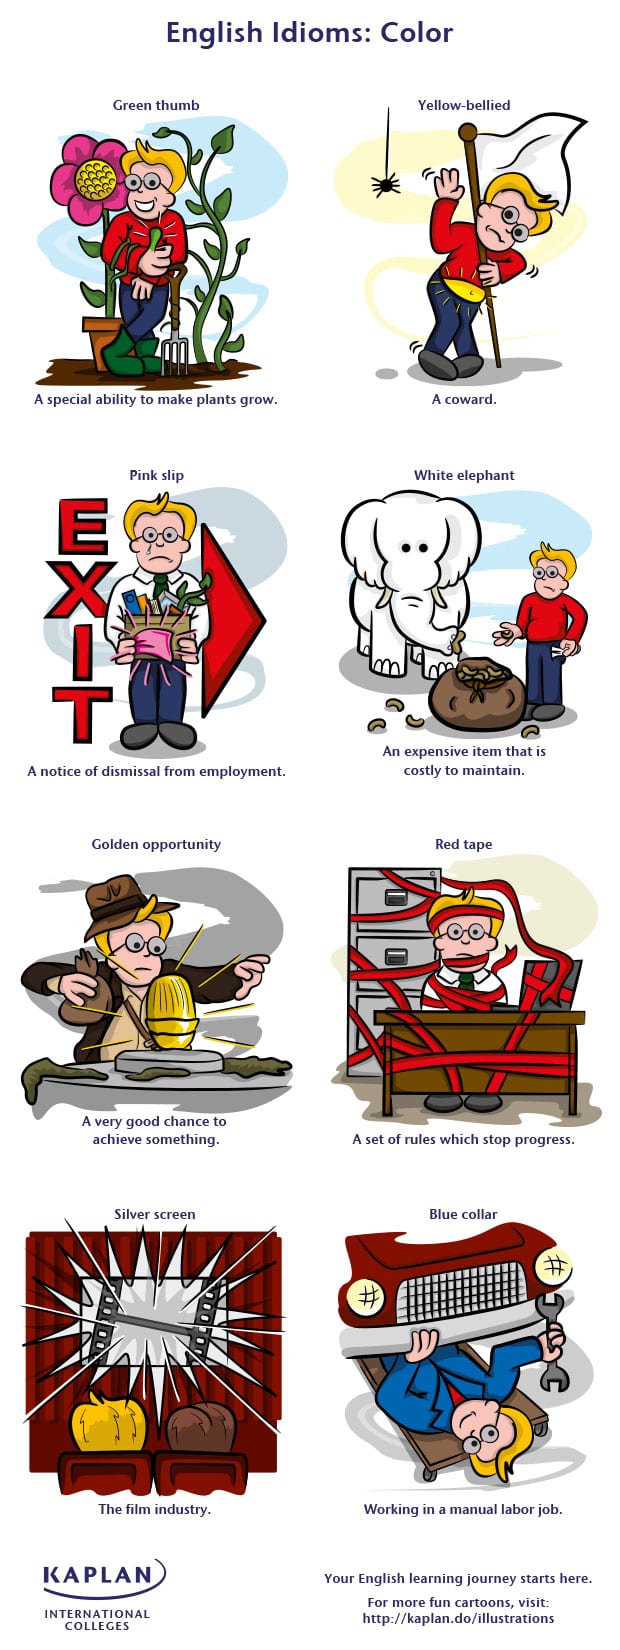 colour idioms with meanings